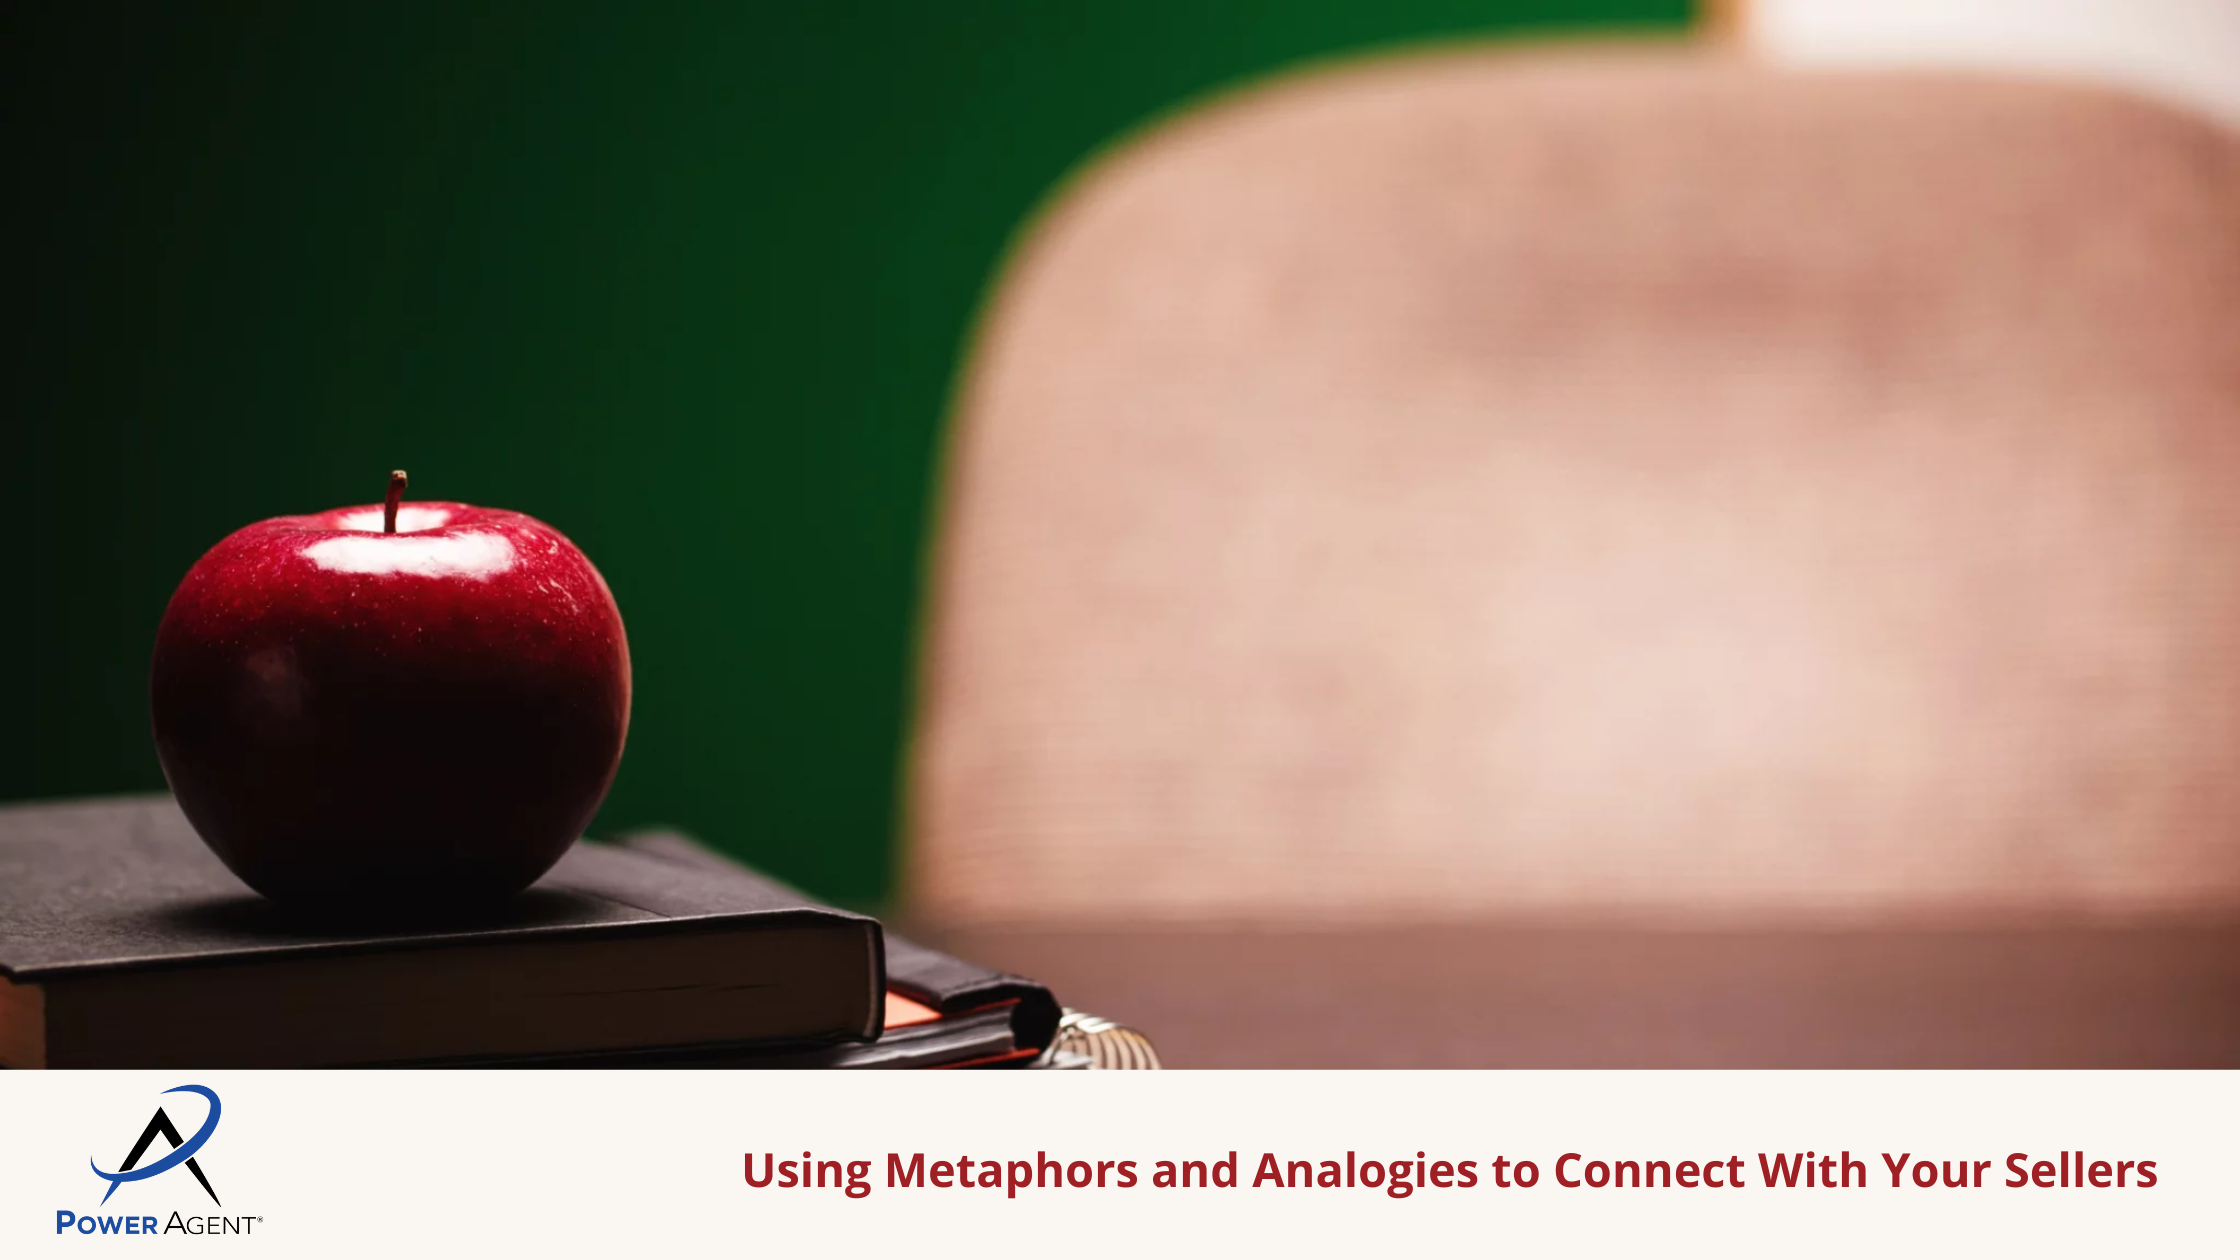 Using Metaphors and Analogies to Connect With Your Sellers